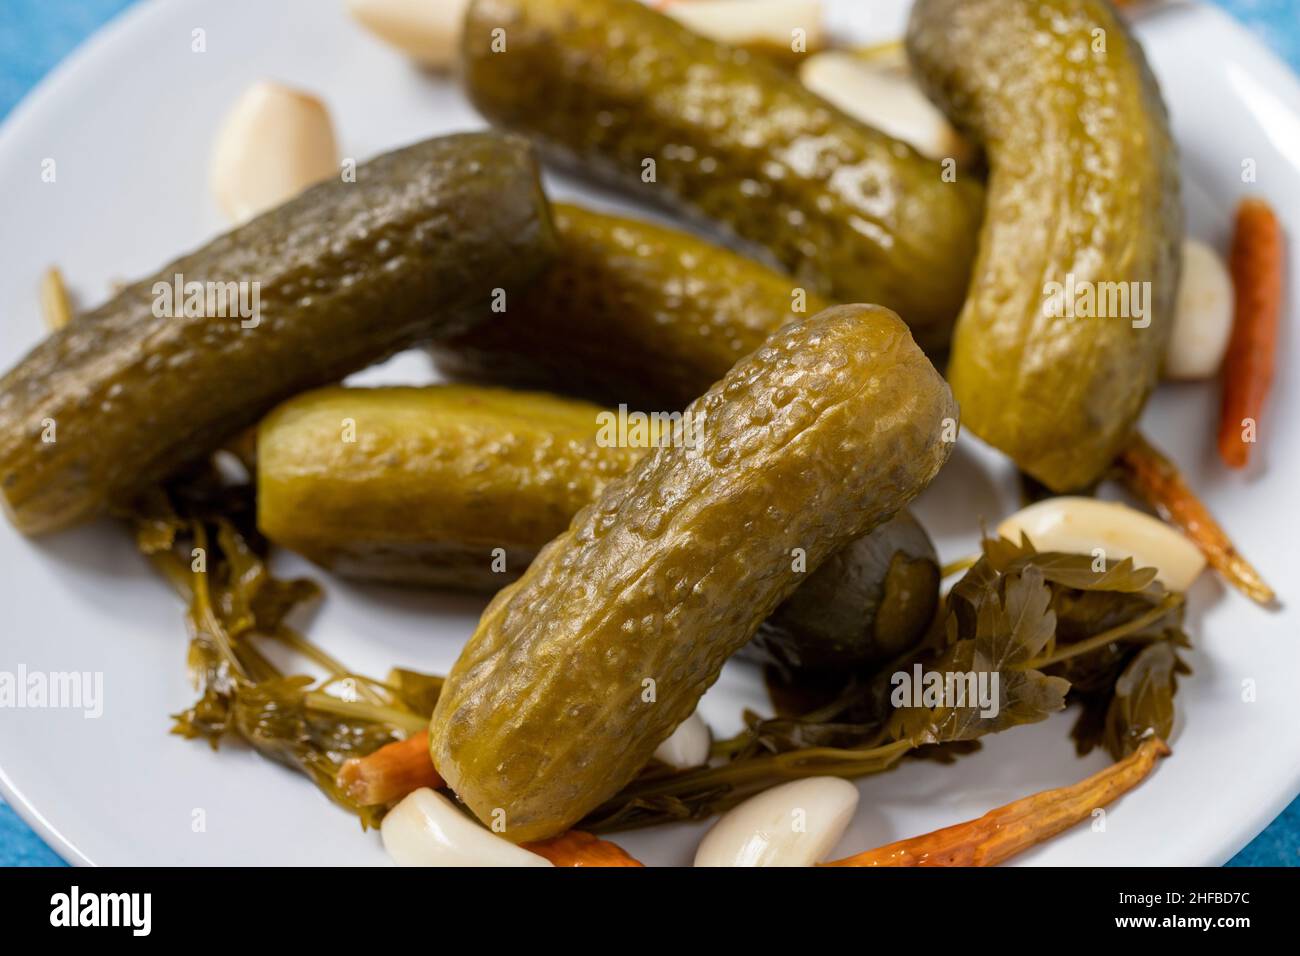 Pickled cucumbers on rusty iron background. Close-up of pickled cucumbers in a ceramic plate. close up Stock Photo